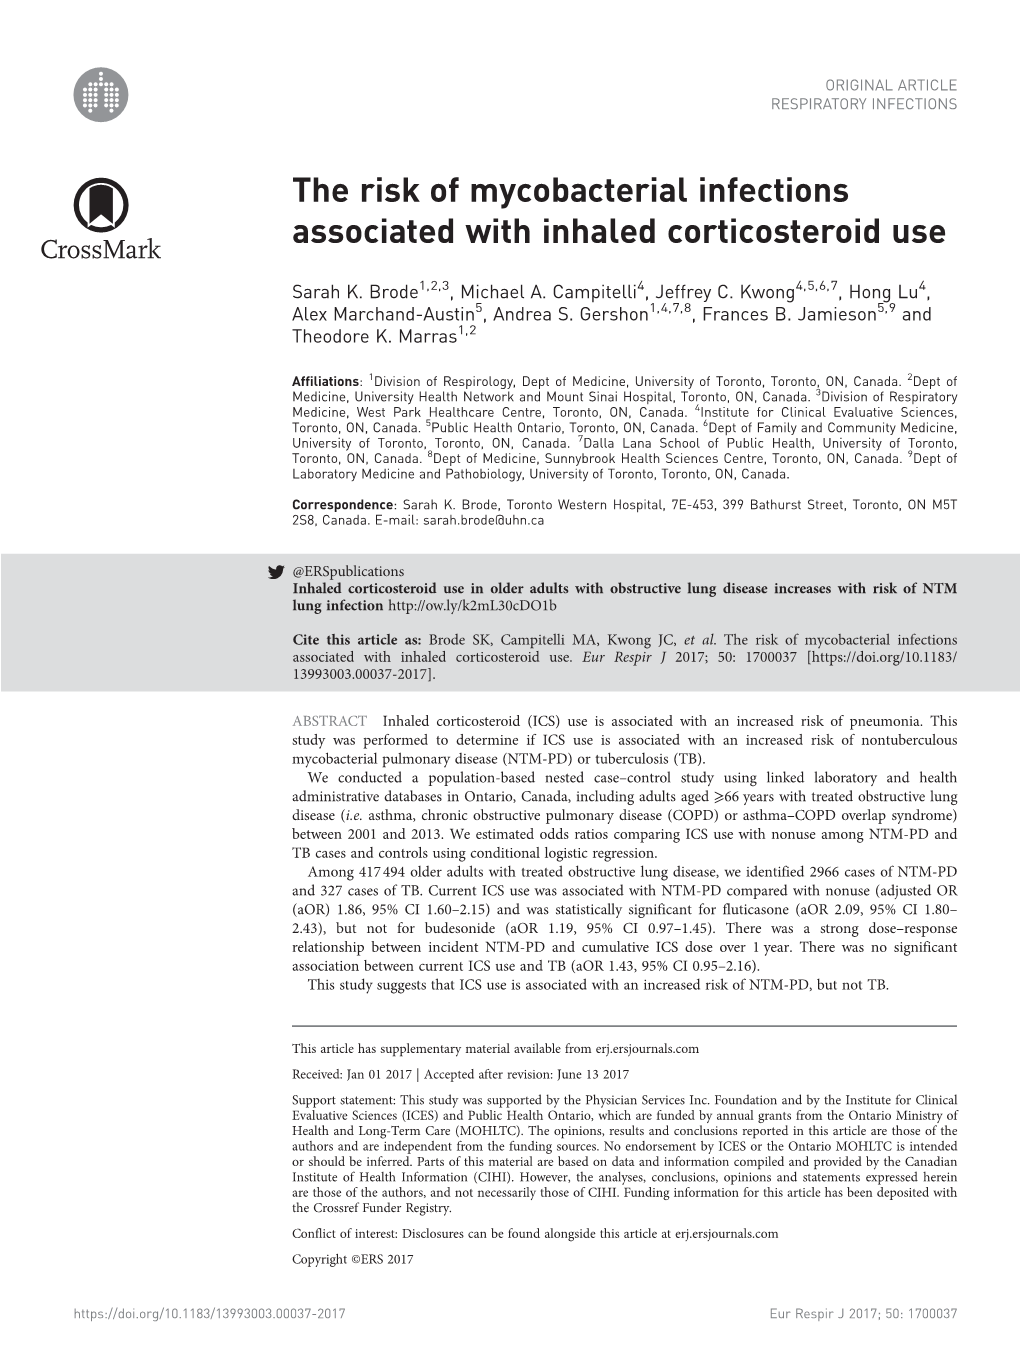 The Risk of Mycobacterial Infections Associated with Inhaled Corticosteroid Use